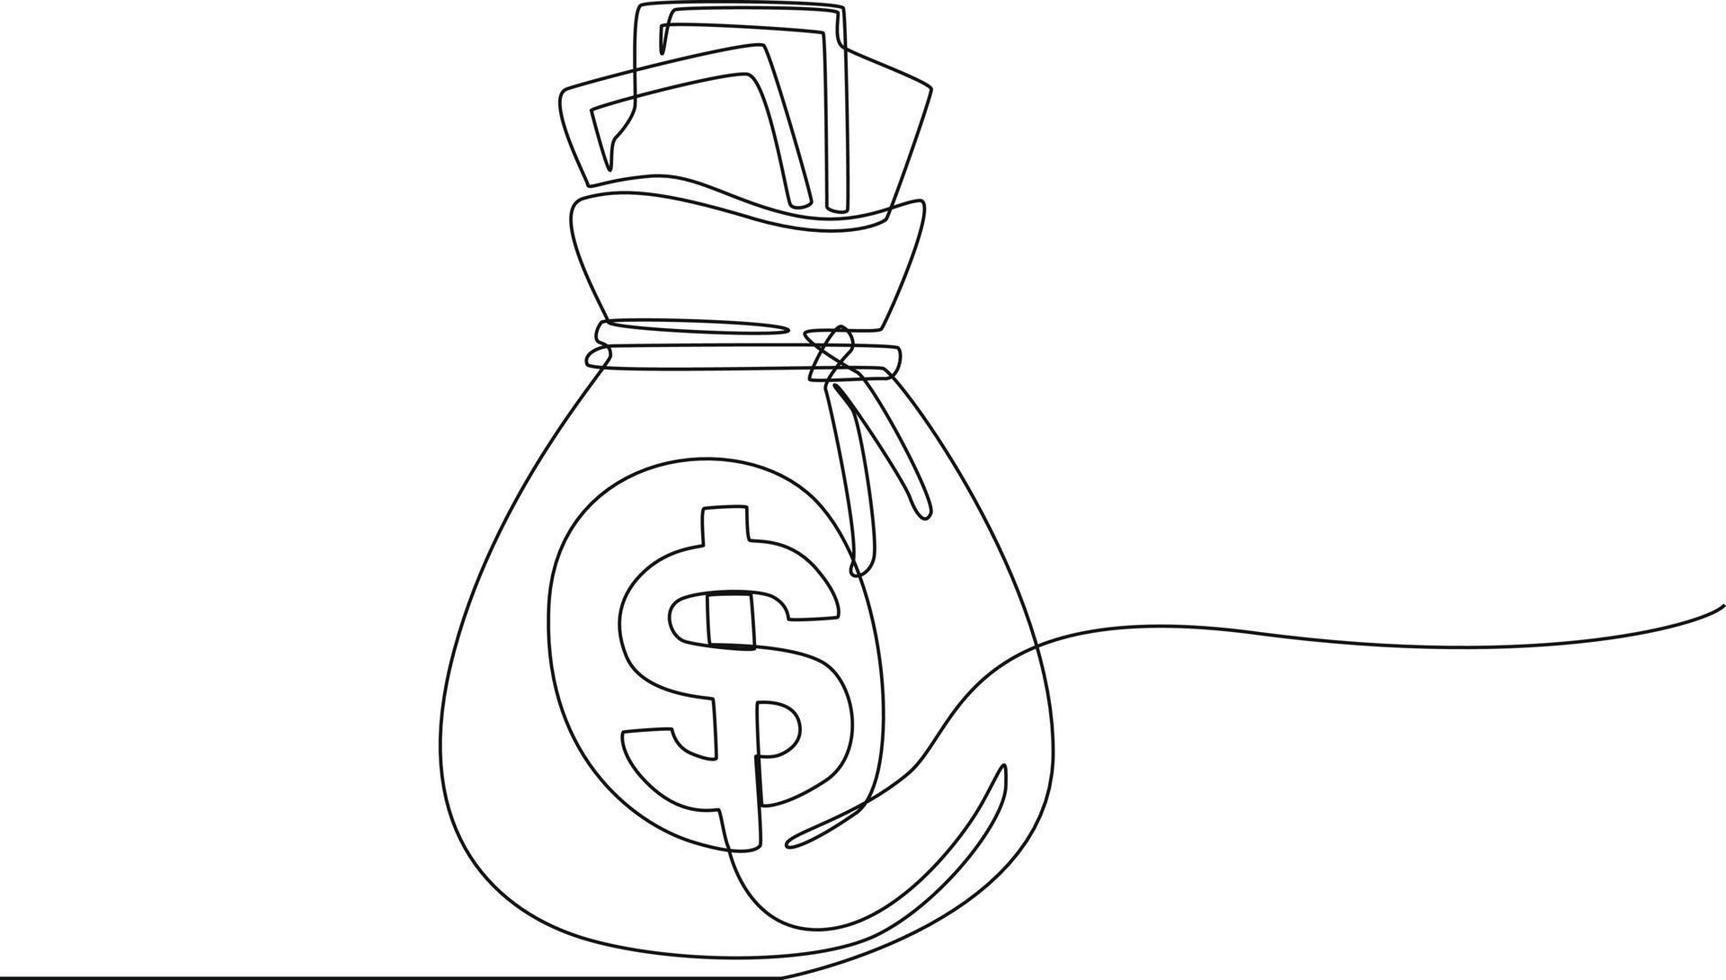 Continuous line drawing of money bag   in dollars. Finance and Investment. Single line draw design vector graphic illustration.